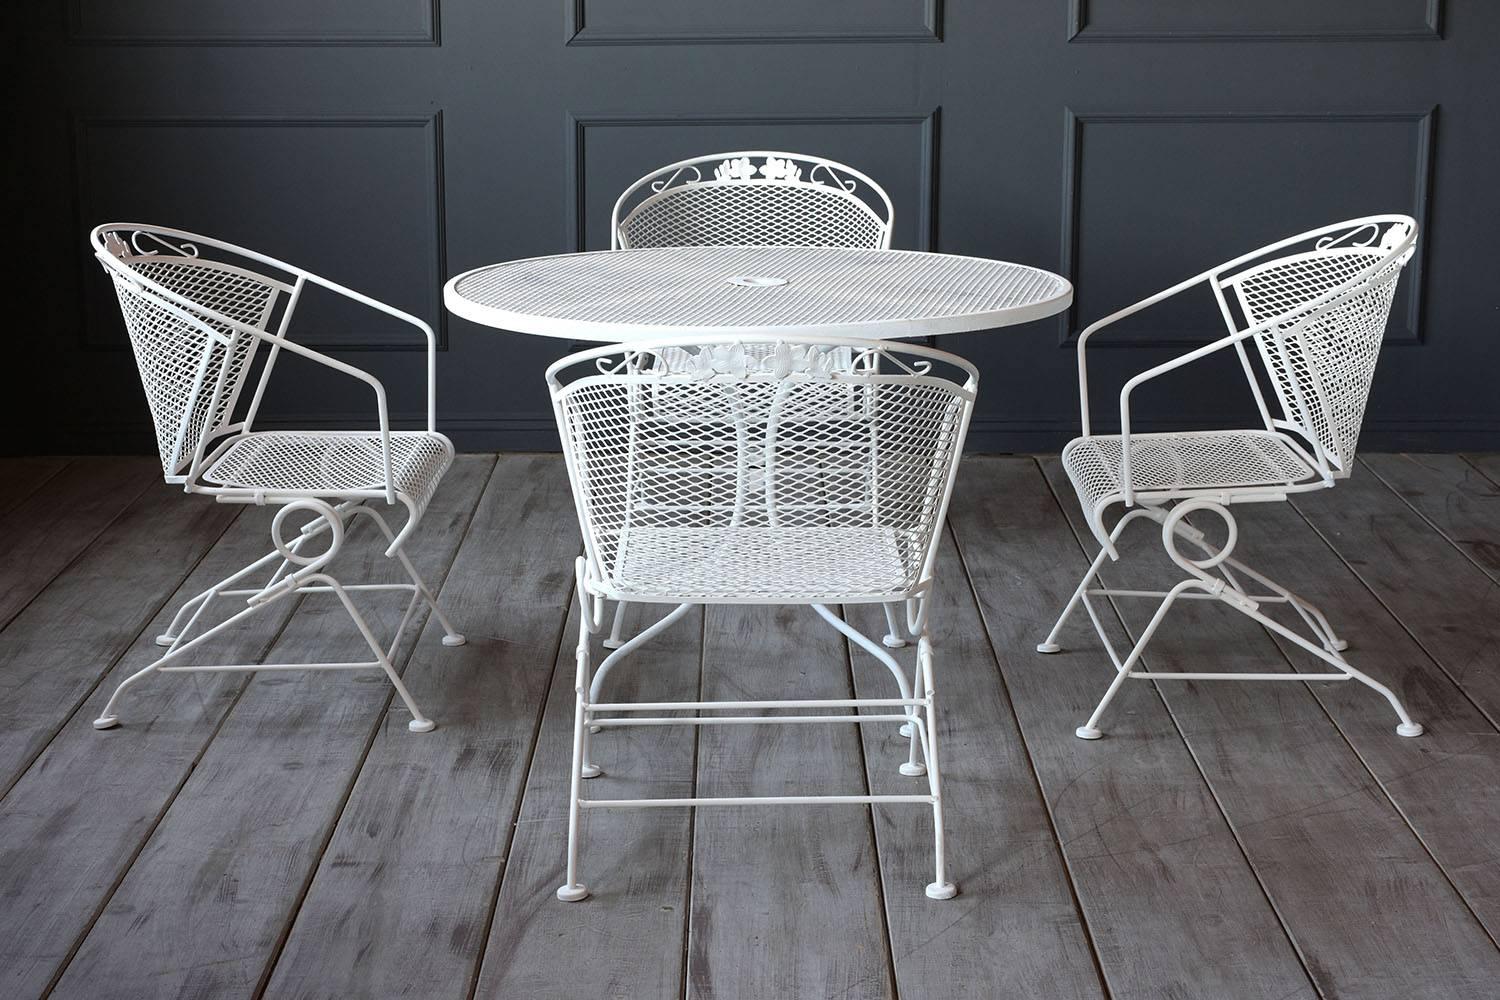 This 1960s five-piece outdoor dining set includes a dining table and four armchairs made of iron finished in an off-white color. The dining table features a classic design with a pedestal base and a mesh wire top with an umbrella stand in the